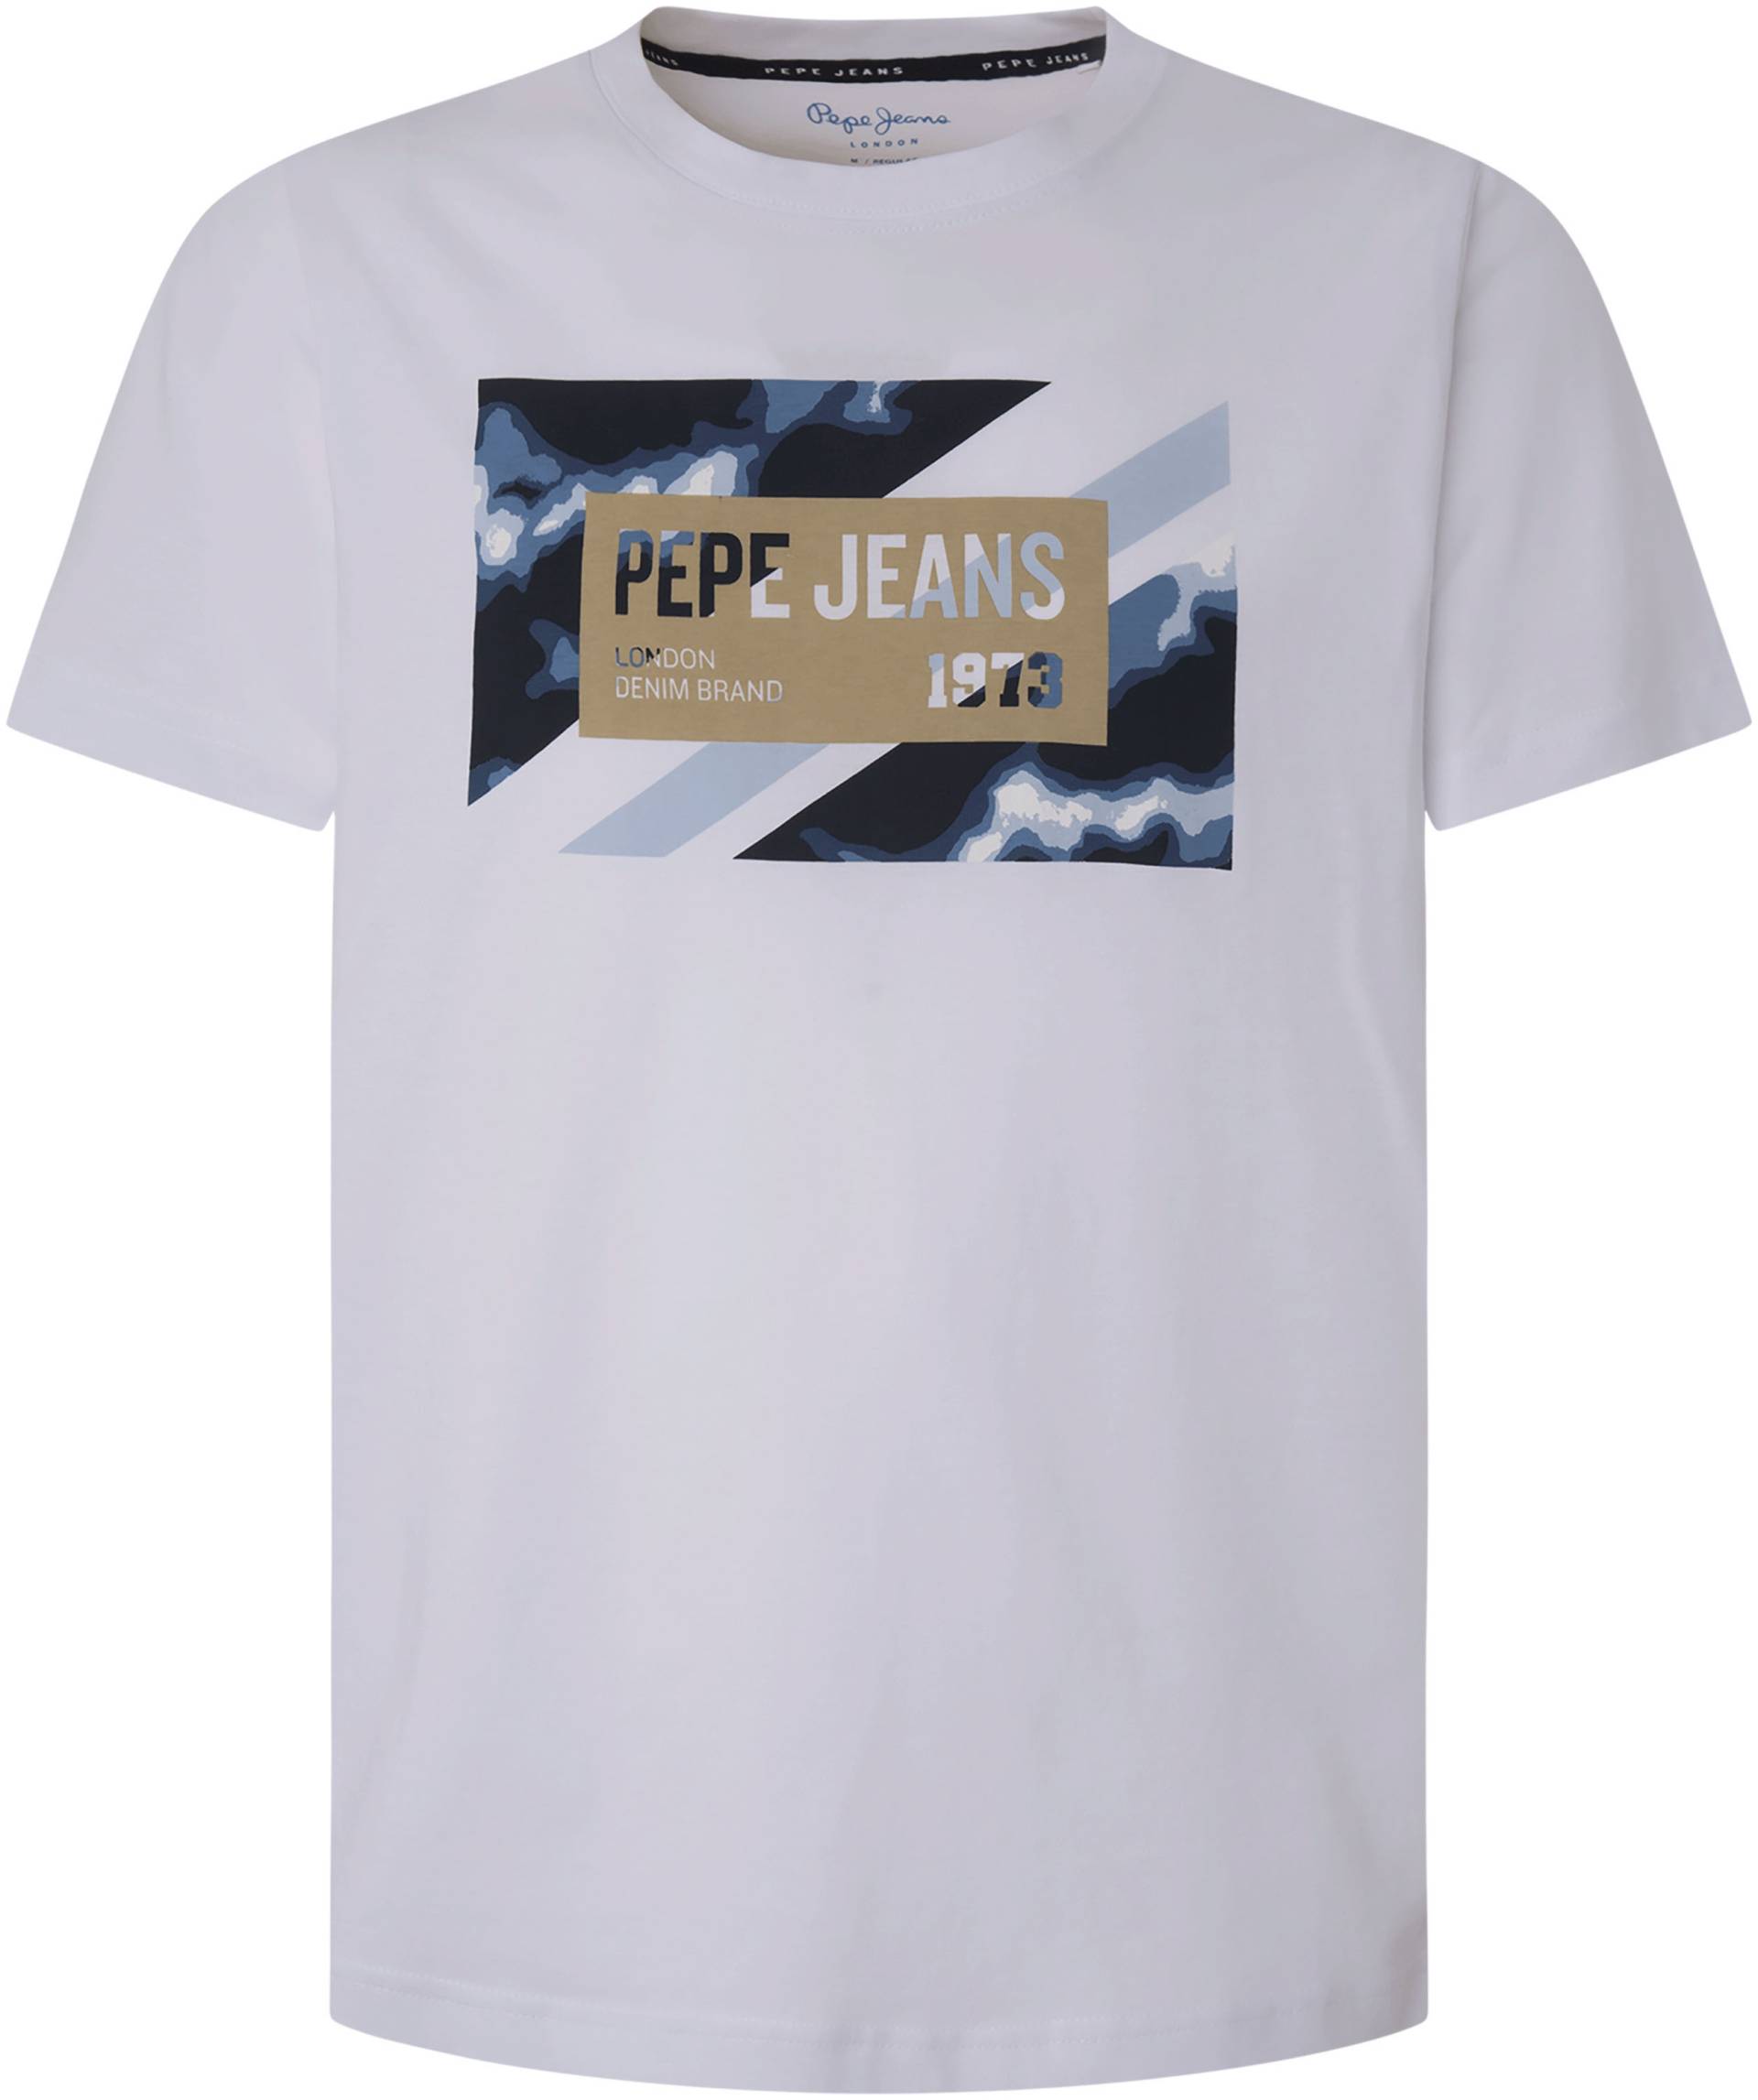 Pepe Jeans T-Shirt von Pepe Jeans